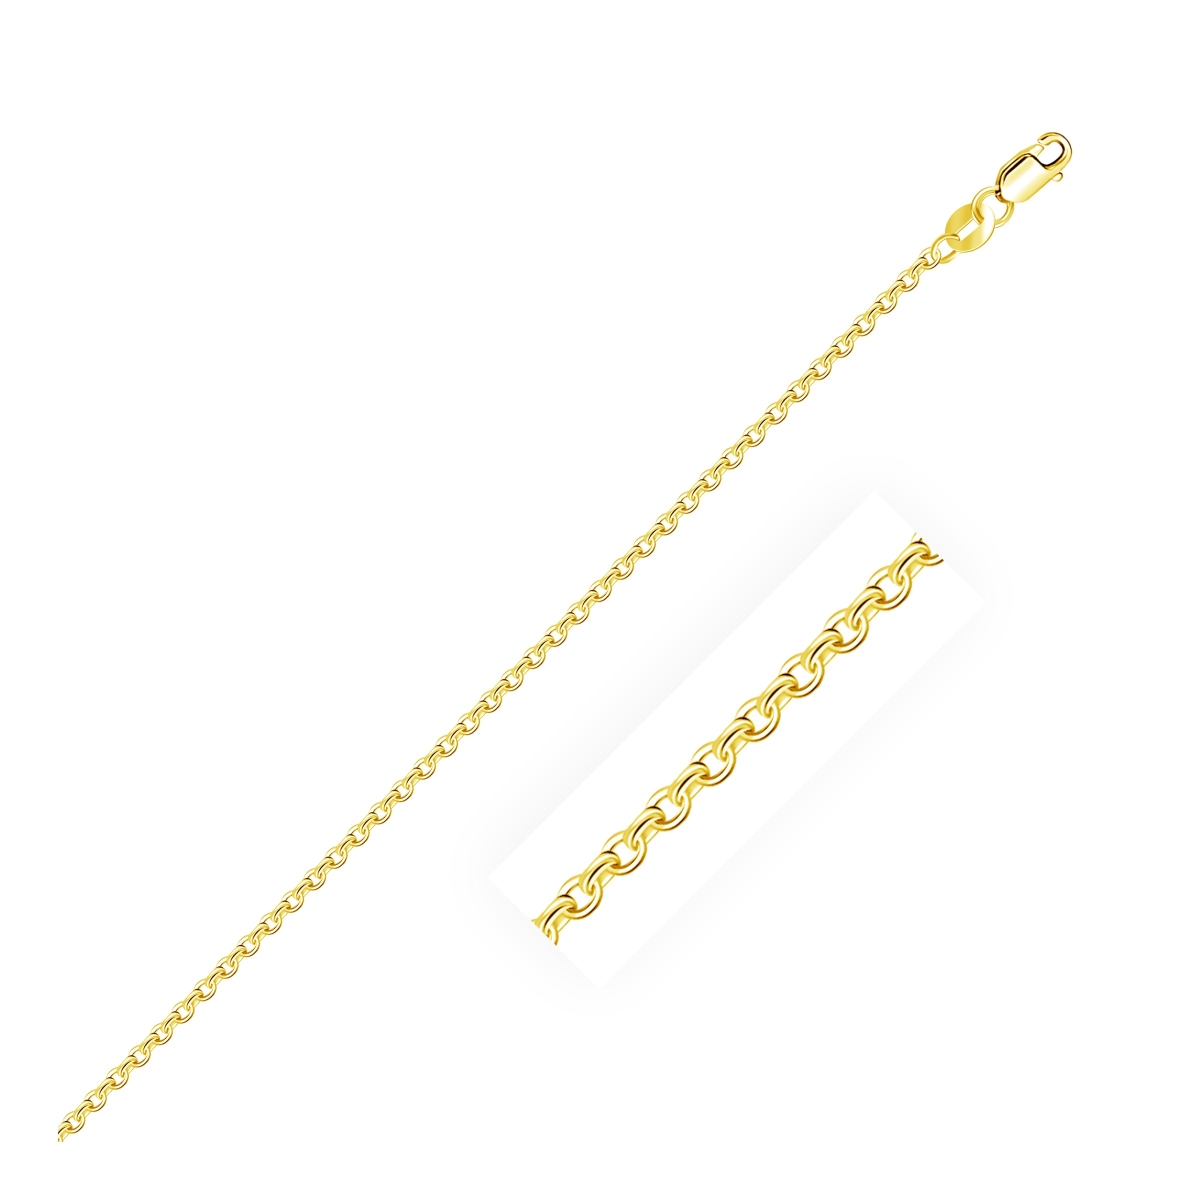 D189553-18 14k Yellow Gold Cable Link Chain, 1.5 Mm - Size 18 In.